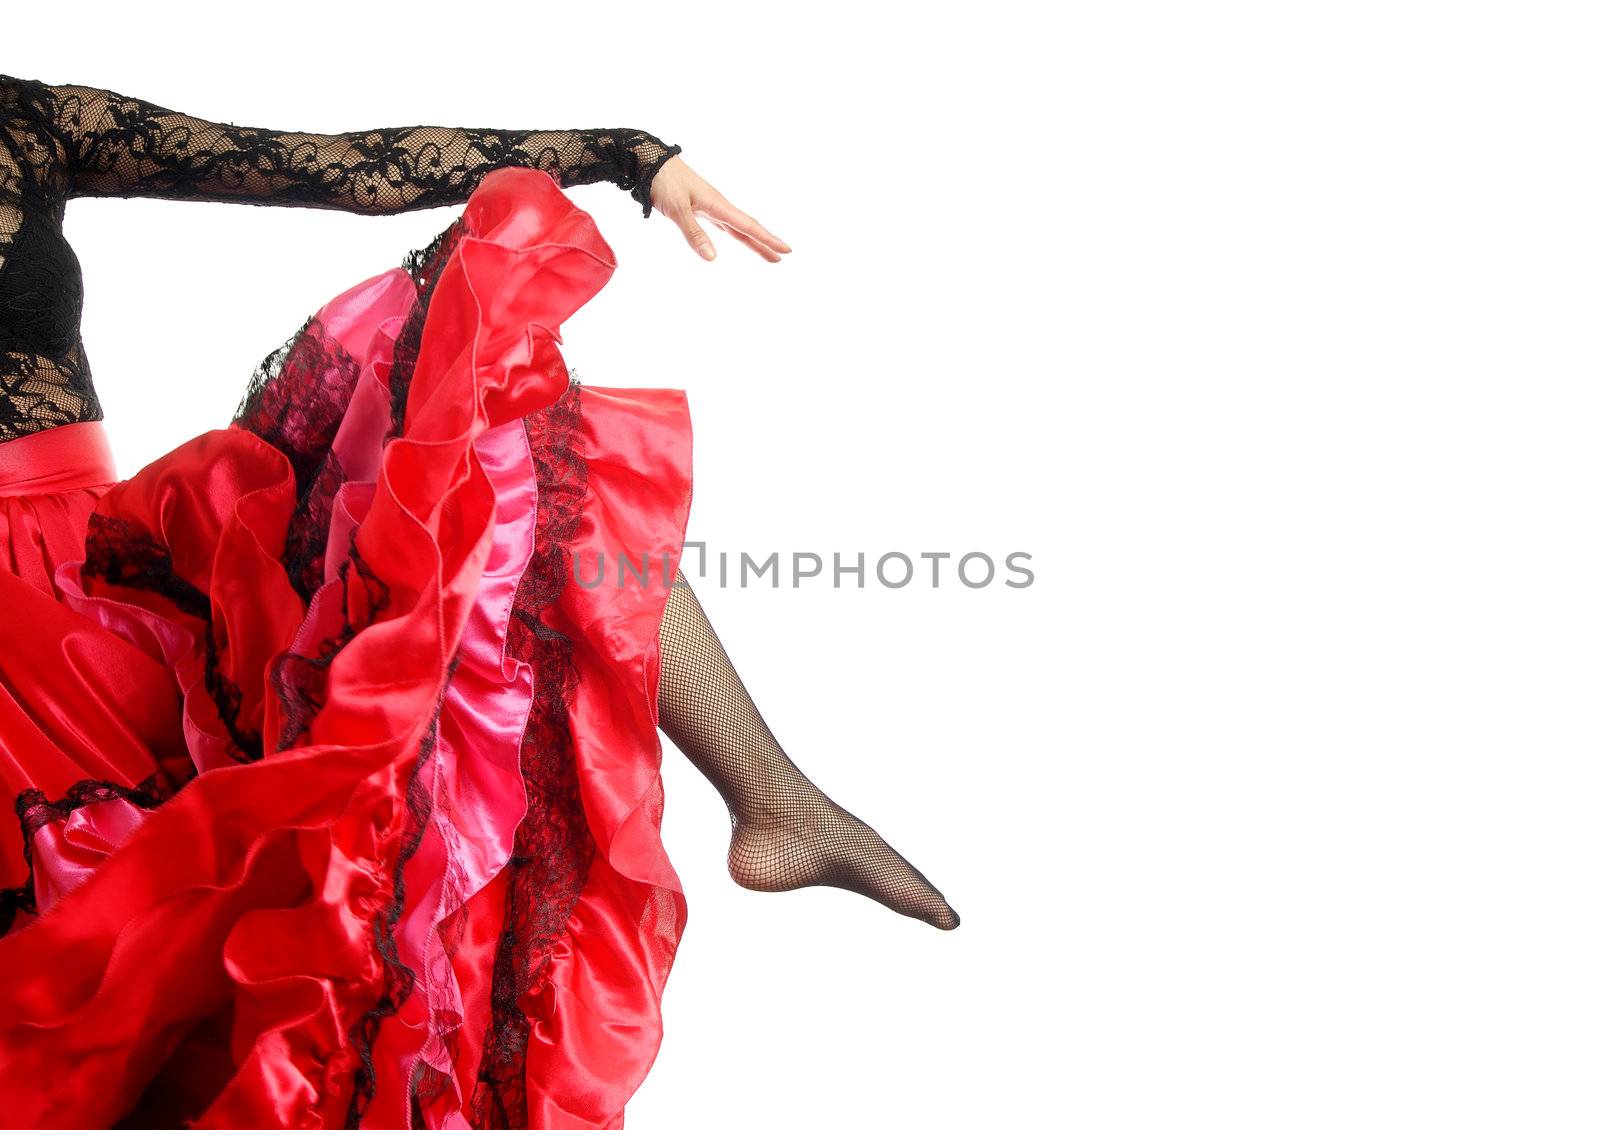 Photo of the leg and arm of Flamenco dancer in Spanish costume